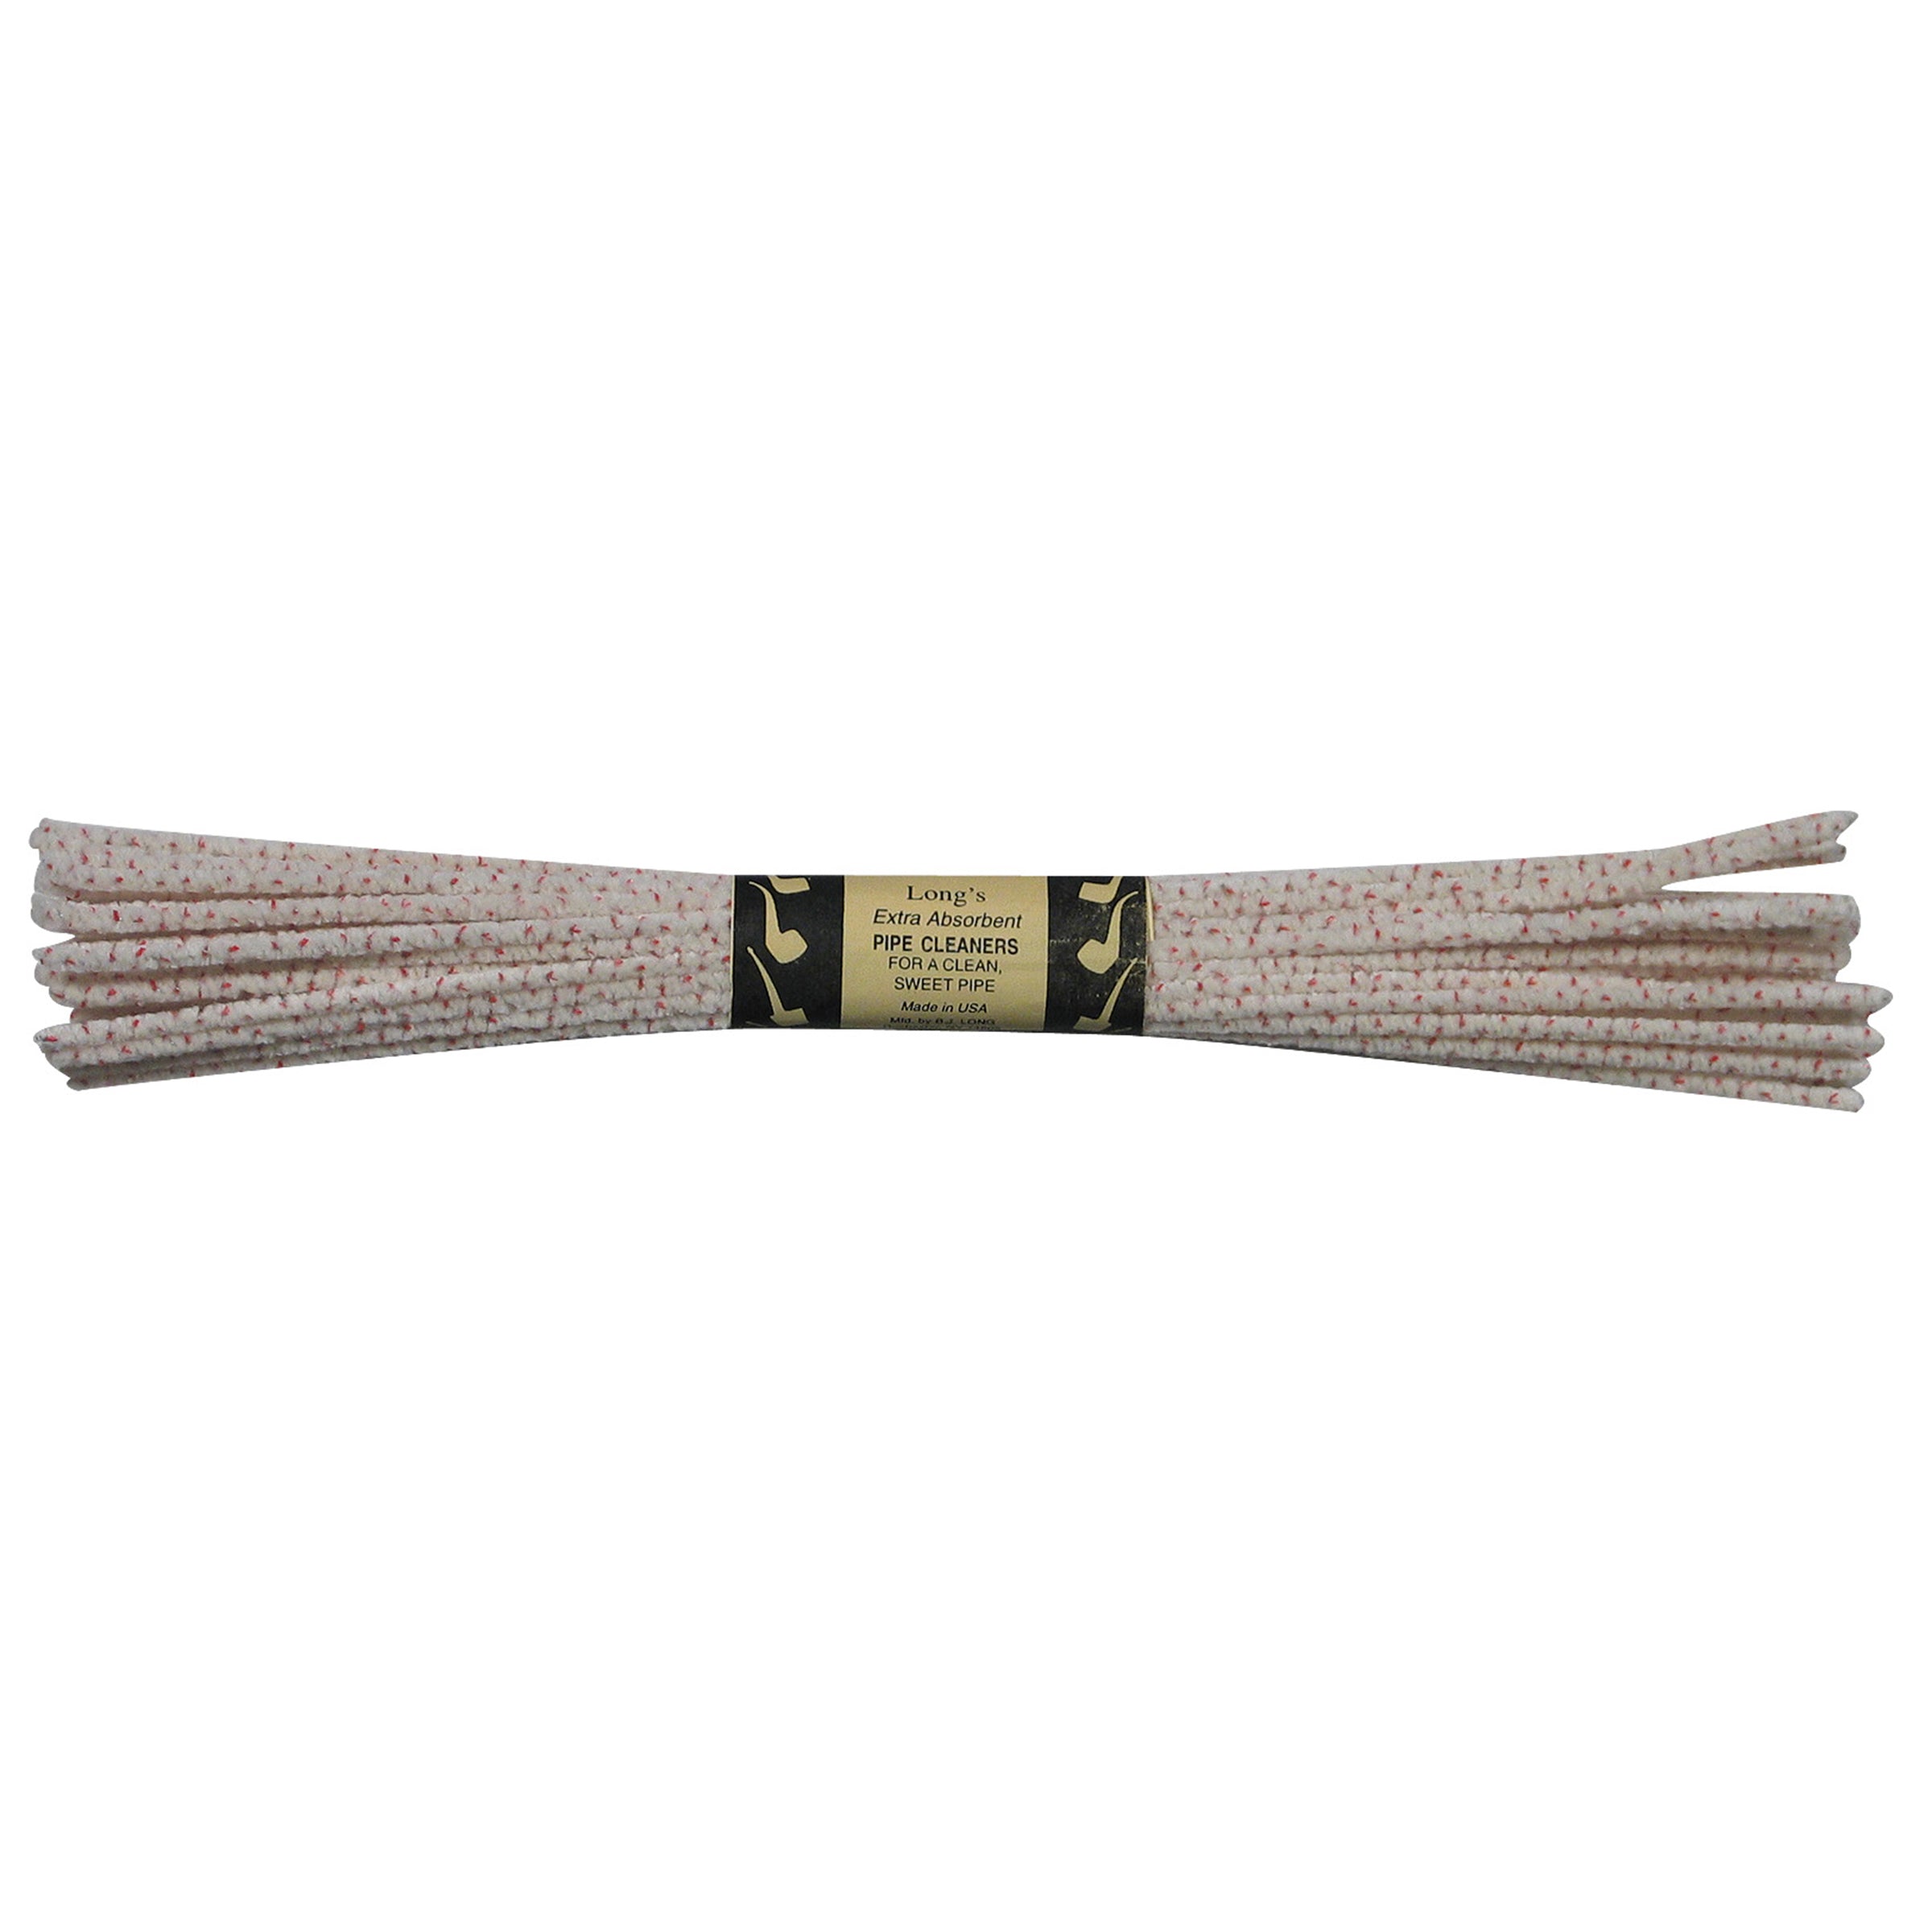 PIPE CLEANERS BIG Ben 50 Long Pipe Cleaners 27cm Long, Suitable